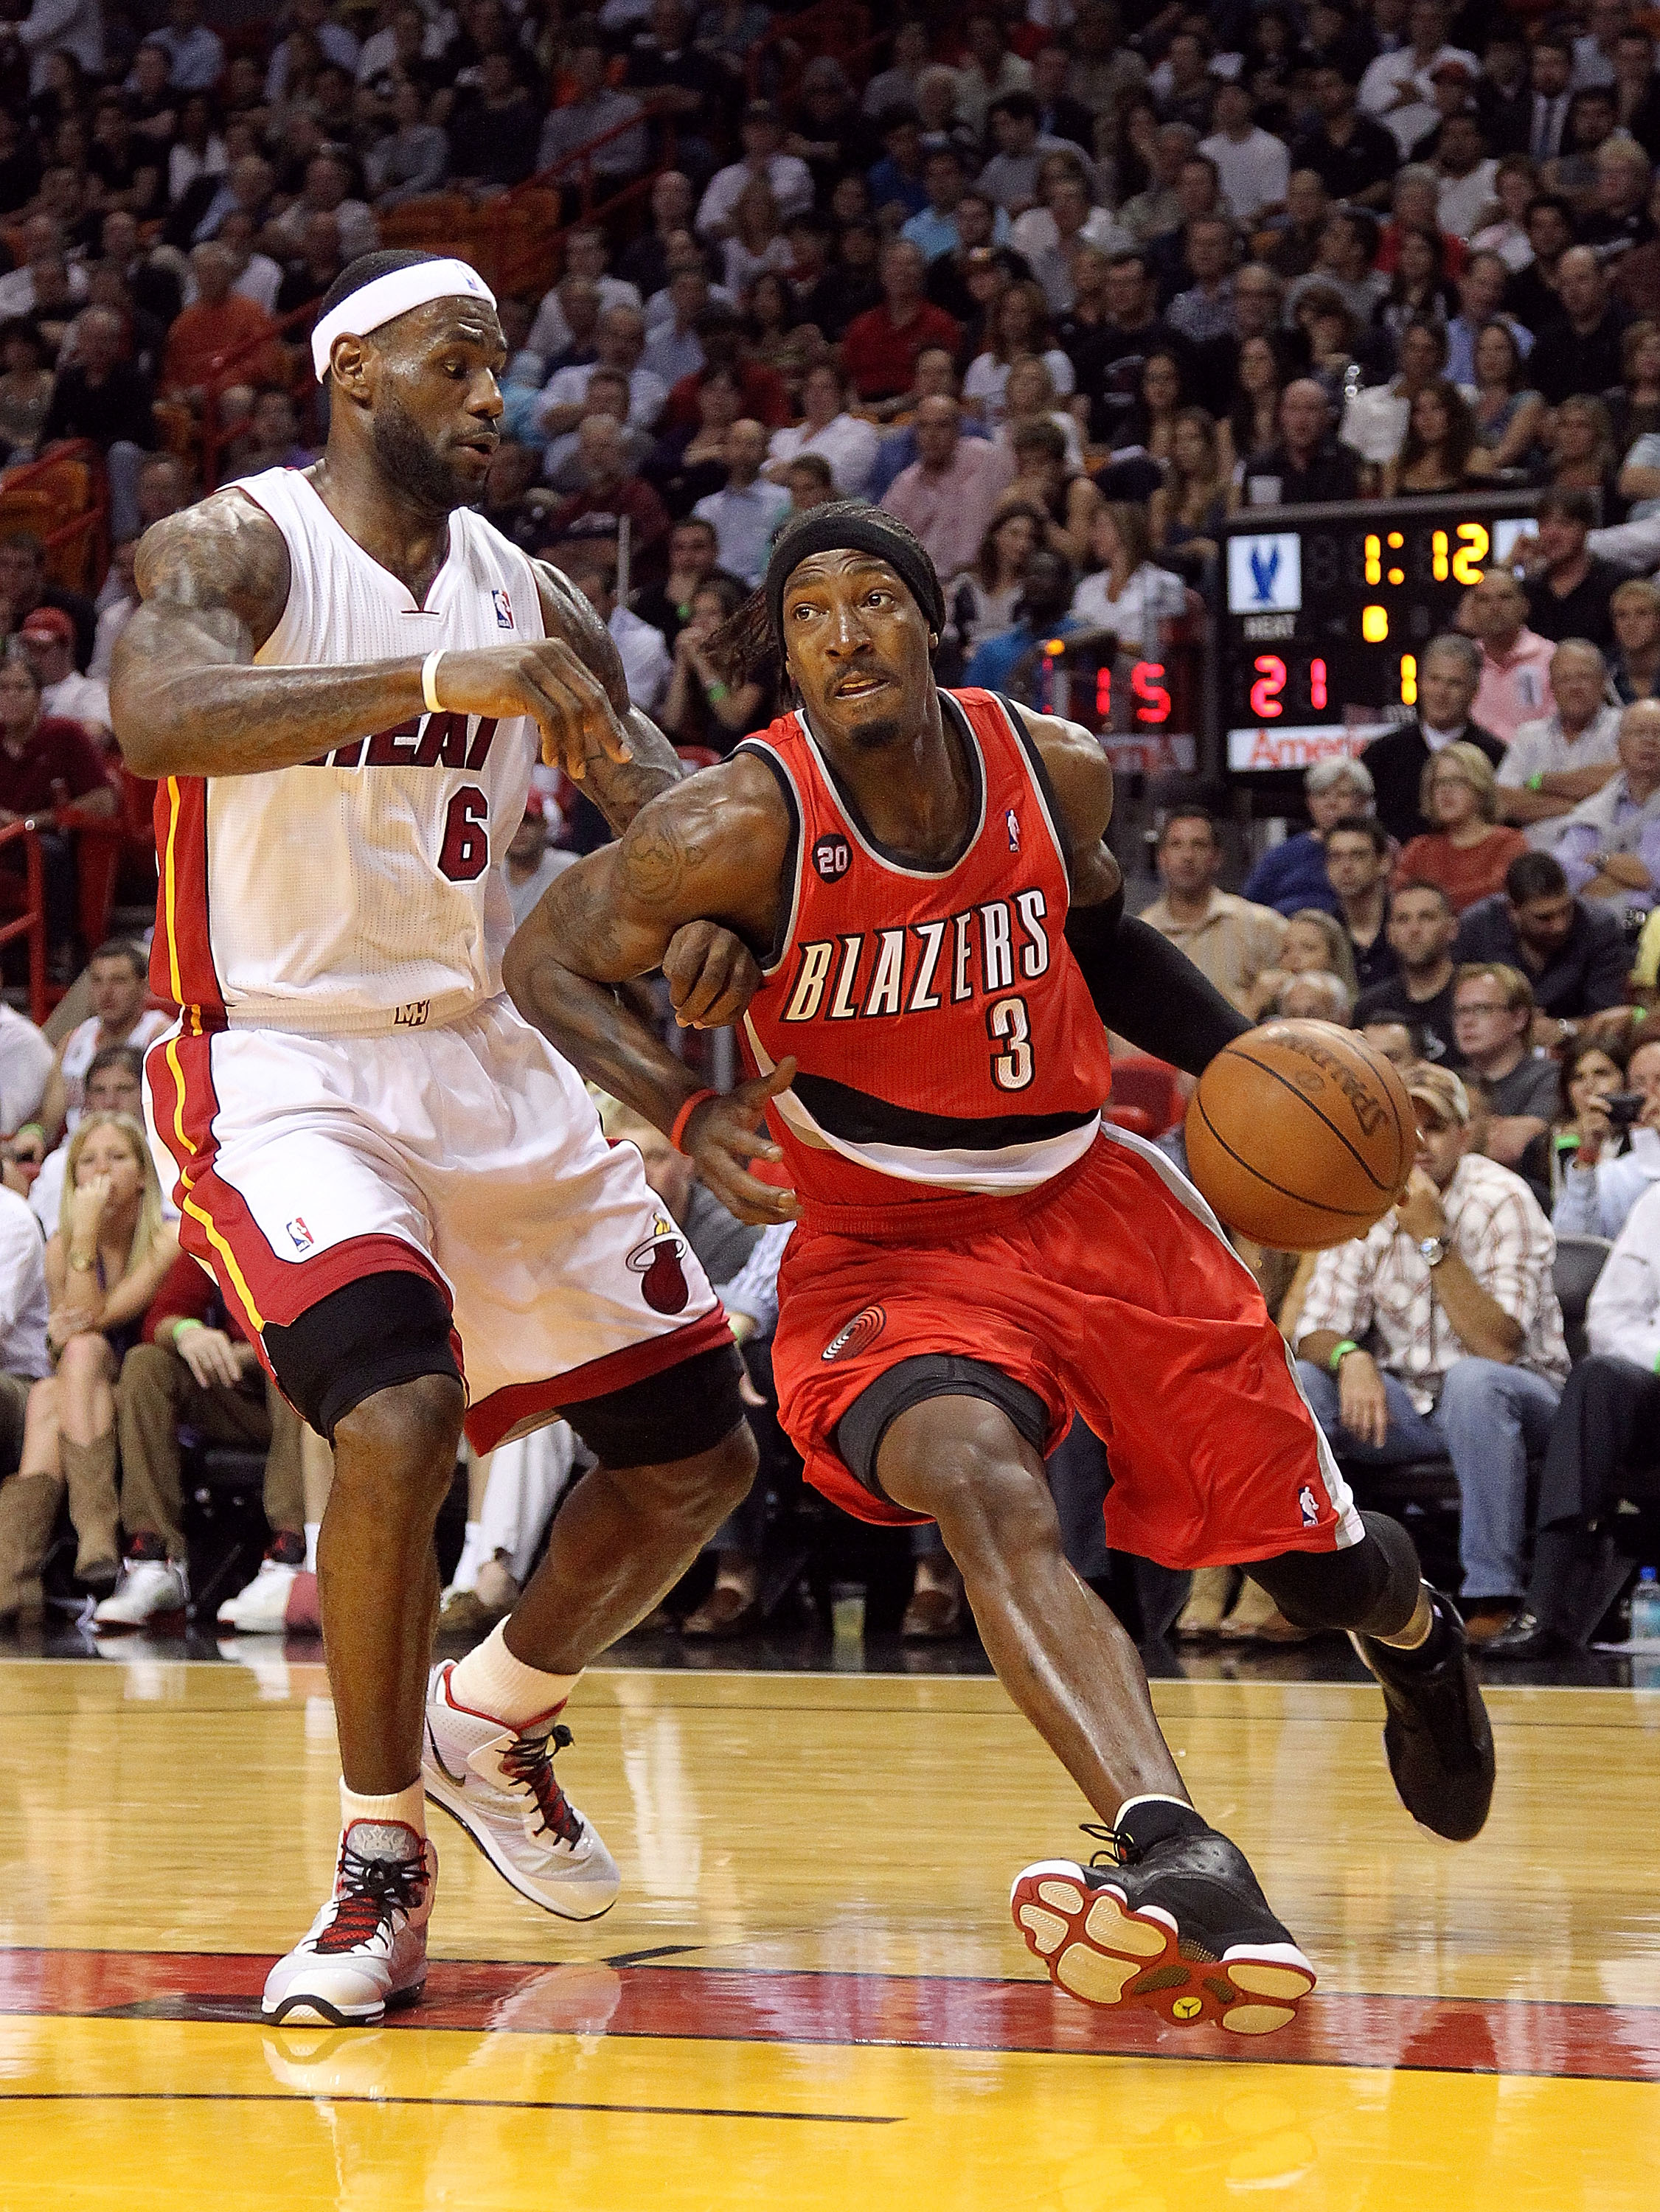 MIAMI, FL - MARCH 08:  Gerald Wallace #3 of the Portland Trail Blazers drives by LeBron James #6 of the Miami Heat during a game at American Airlines Arena on March 8, 2011 in Miami, Florida. NOTE TO USER: User expressly acknowledges and agrees that, by d